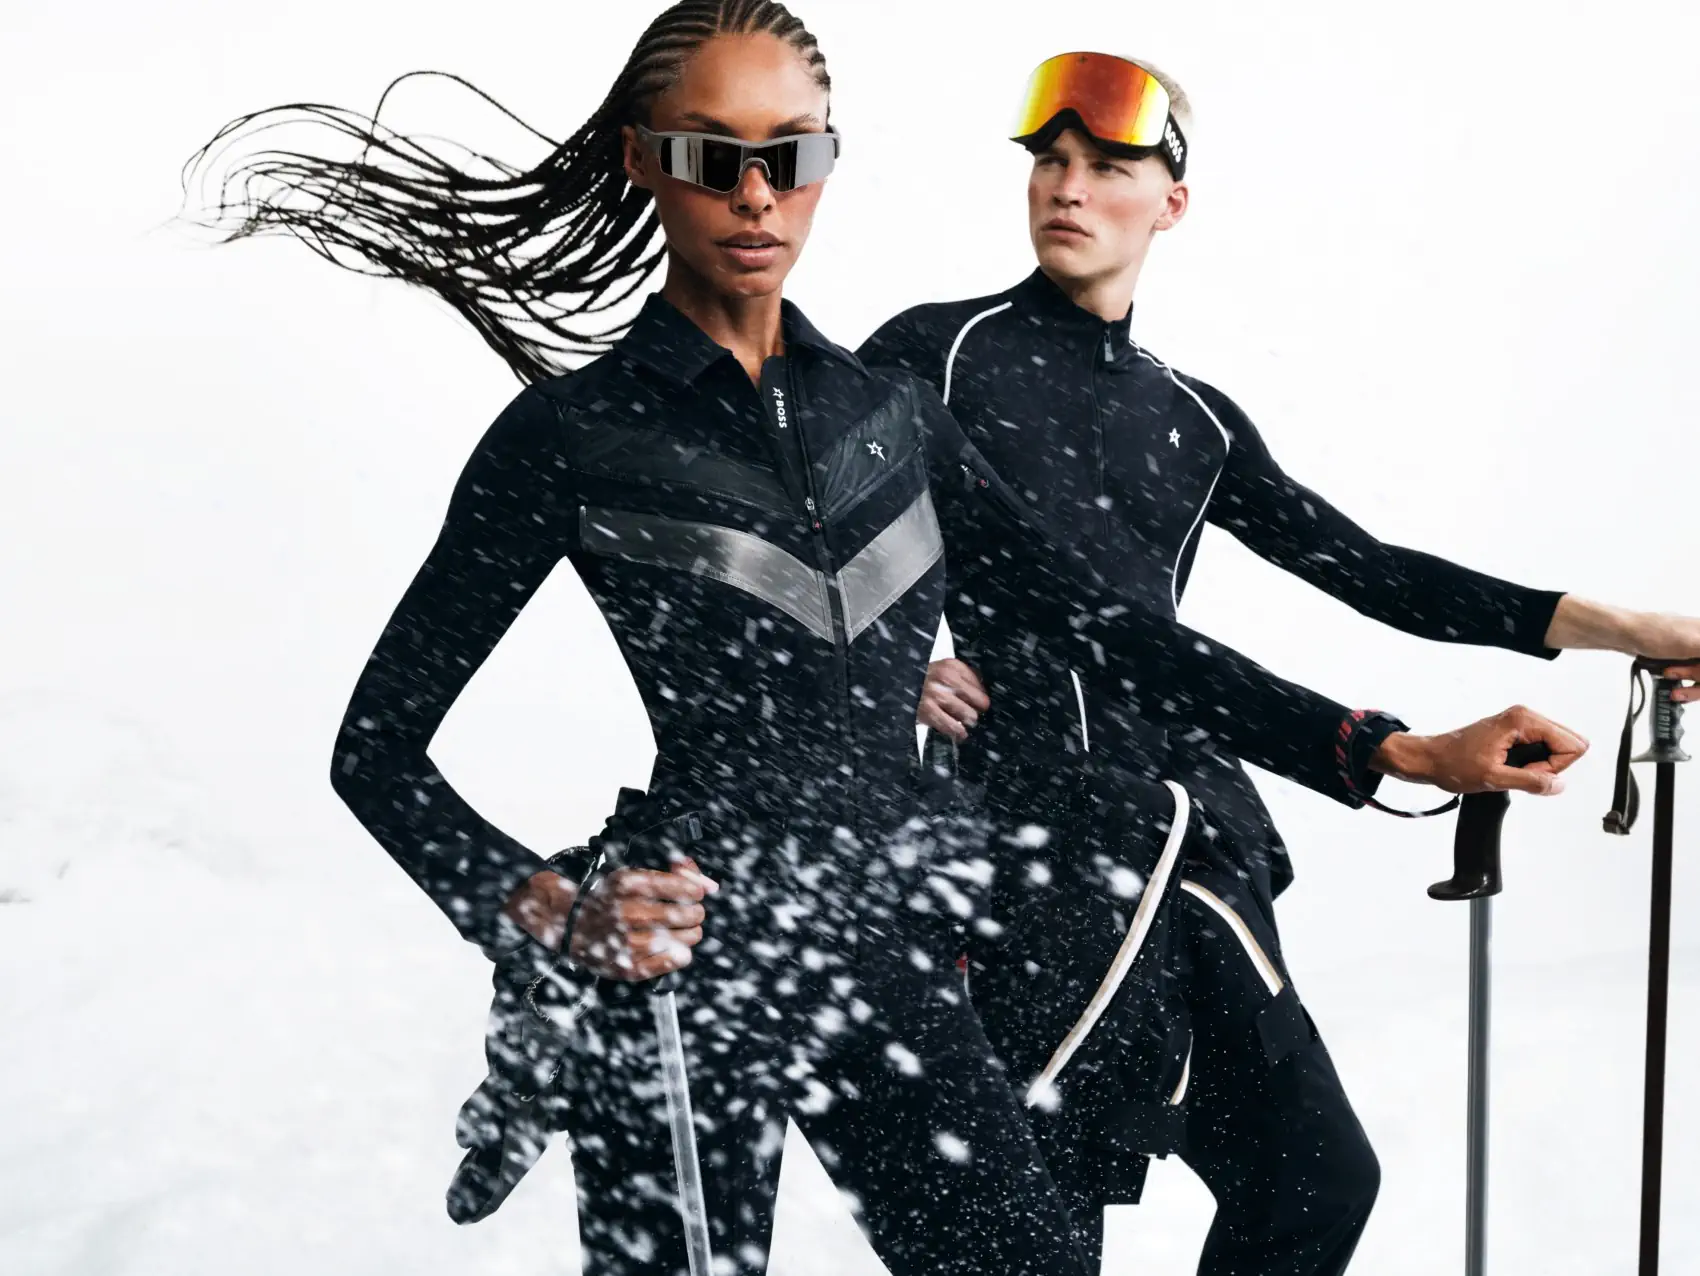 Sleek Ski Fashion Hits the Slopes with BOSS and Perfect Moment's Latest Collaboration